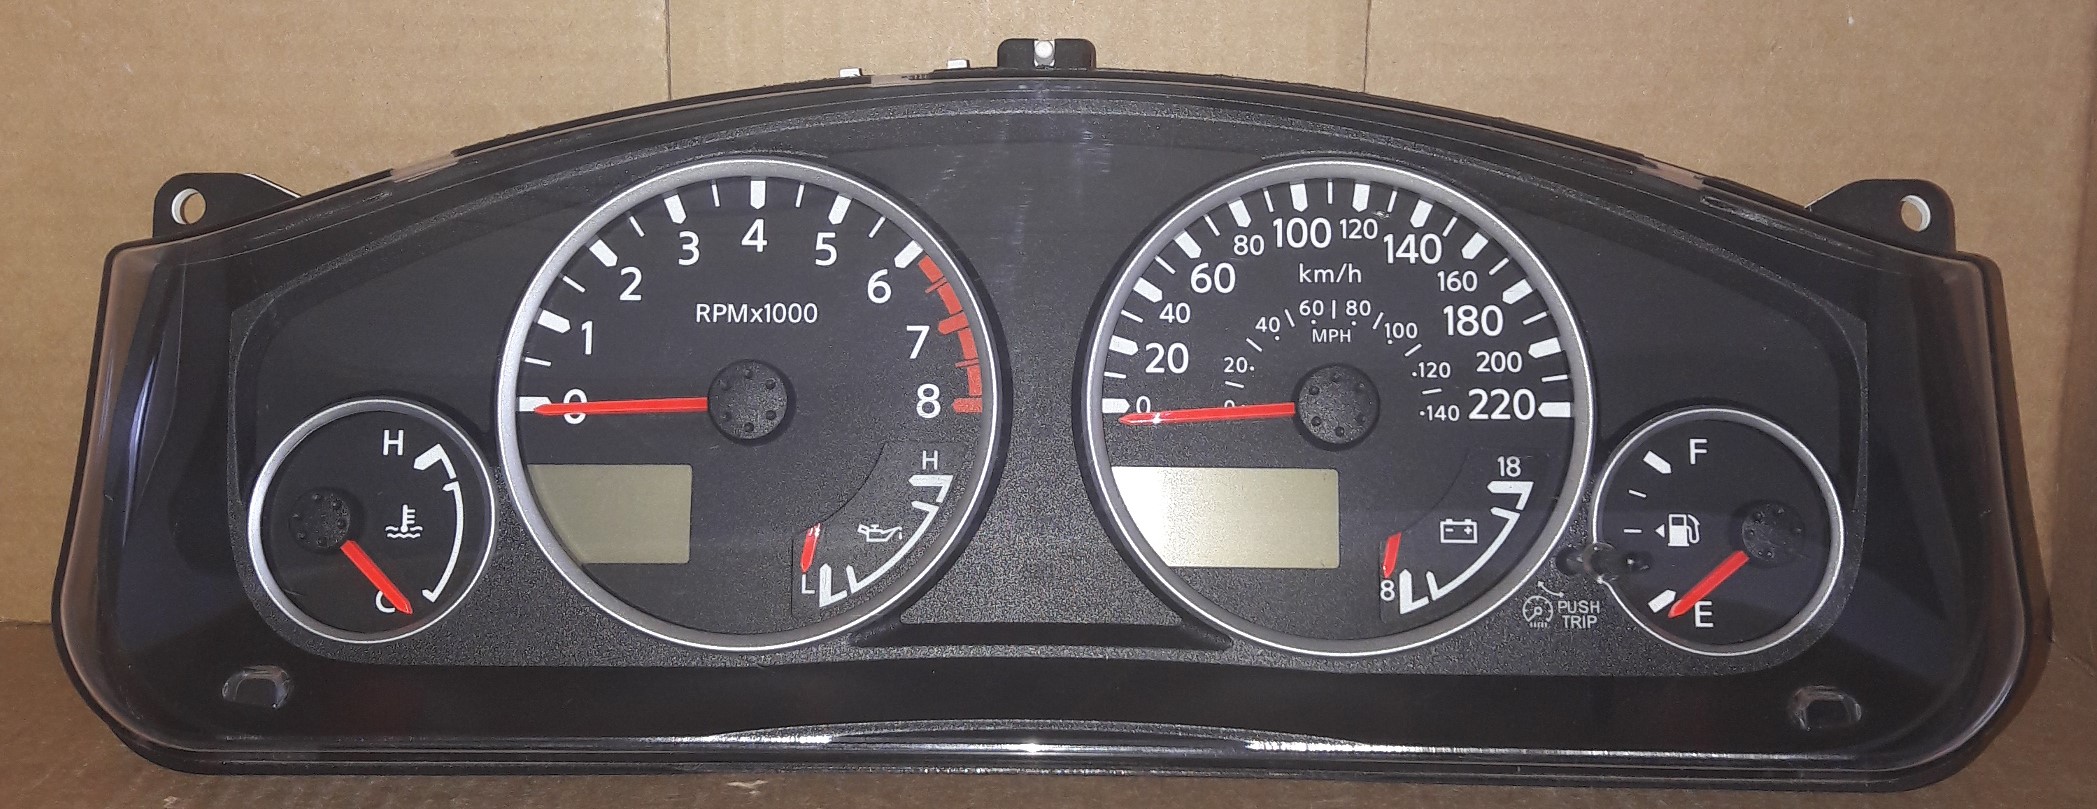 INSTRUMENT CLUSTER REPAIR SERVICE FOR 2005 TO 2008 NISSAN MAXIMA Fits: Nissan